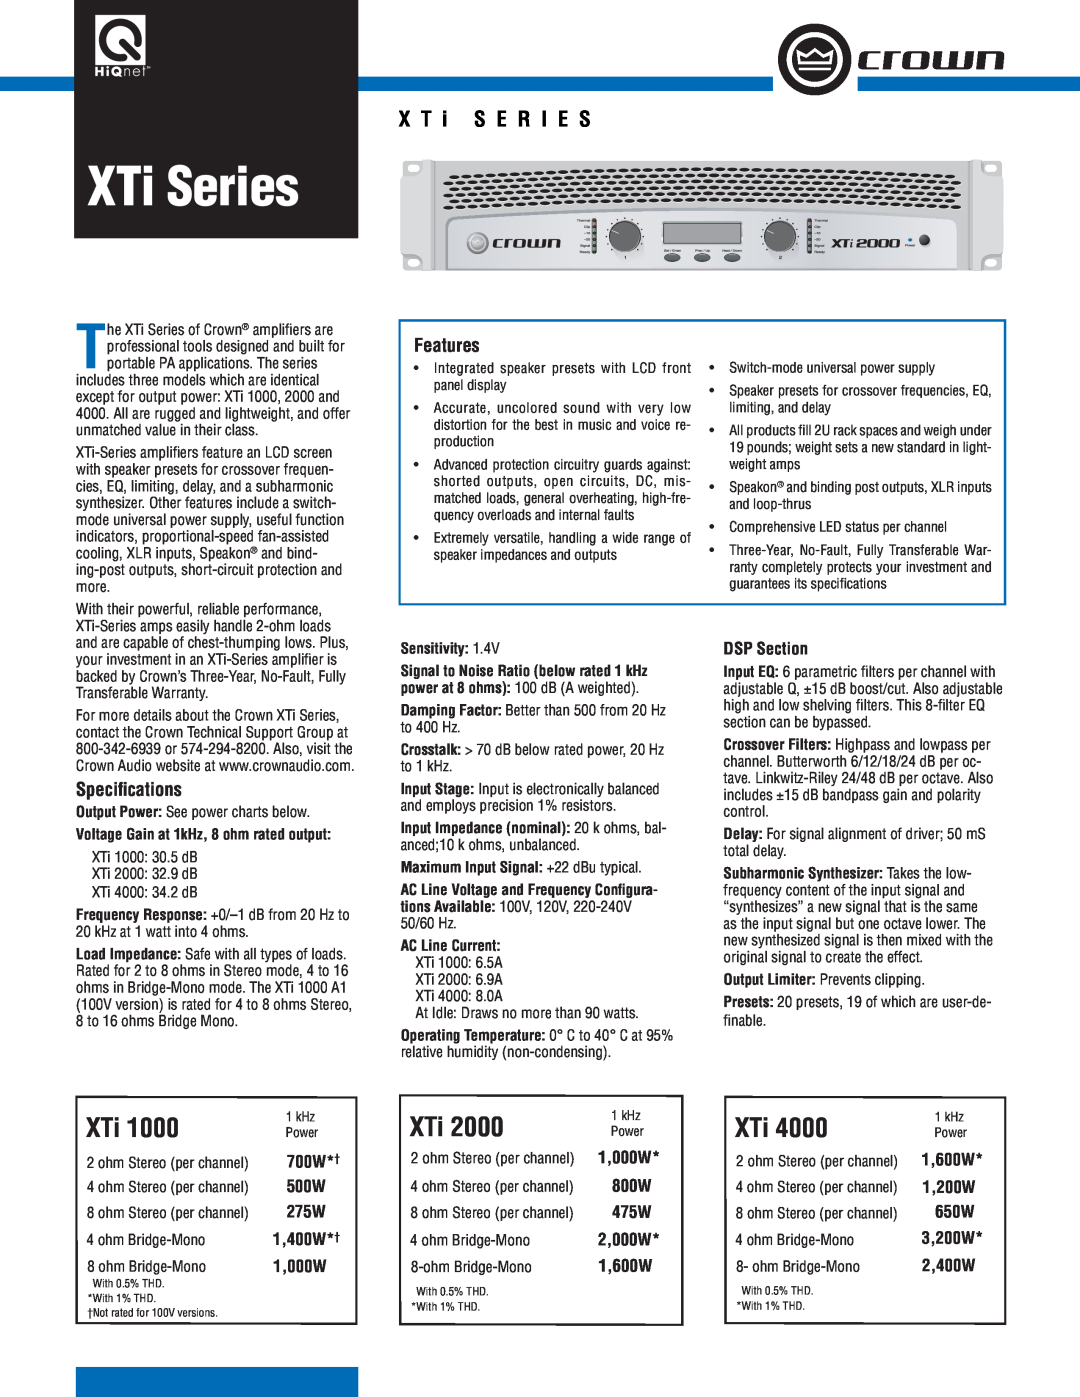 Crown Audio XTi 1000 specifications XTi Series, Features, Speciﬁcations, DSP Section, 700W*† 500W 275W 1,400W*† 1,000W 